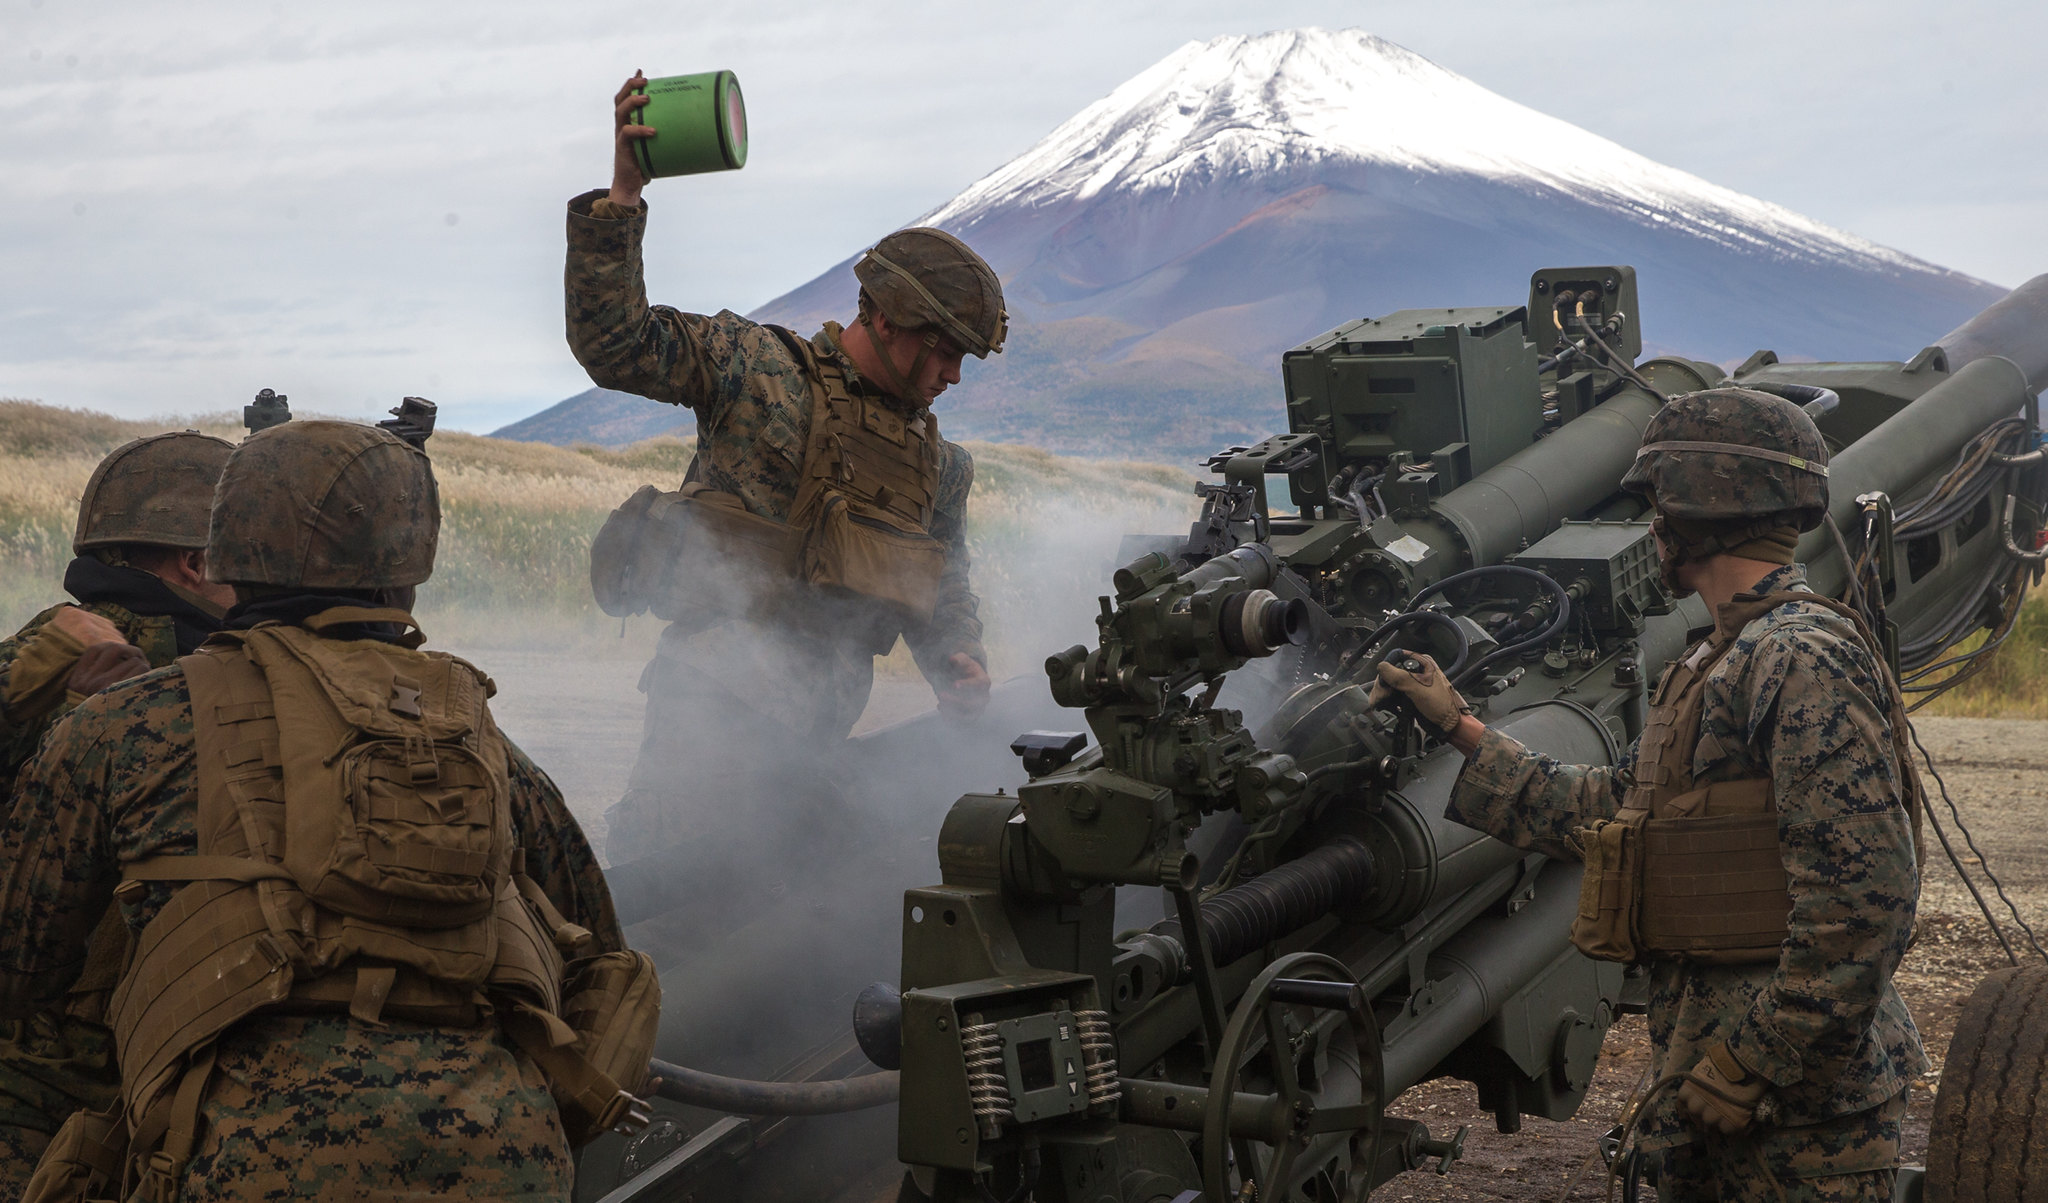 The 12 coolest and best jobs in the Marine Corps (according to Marines)